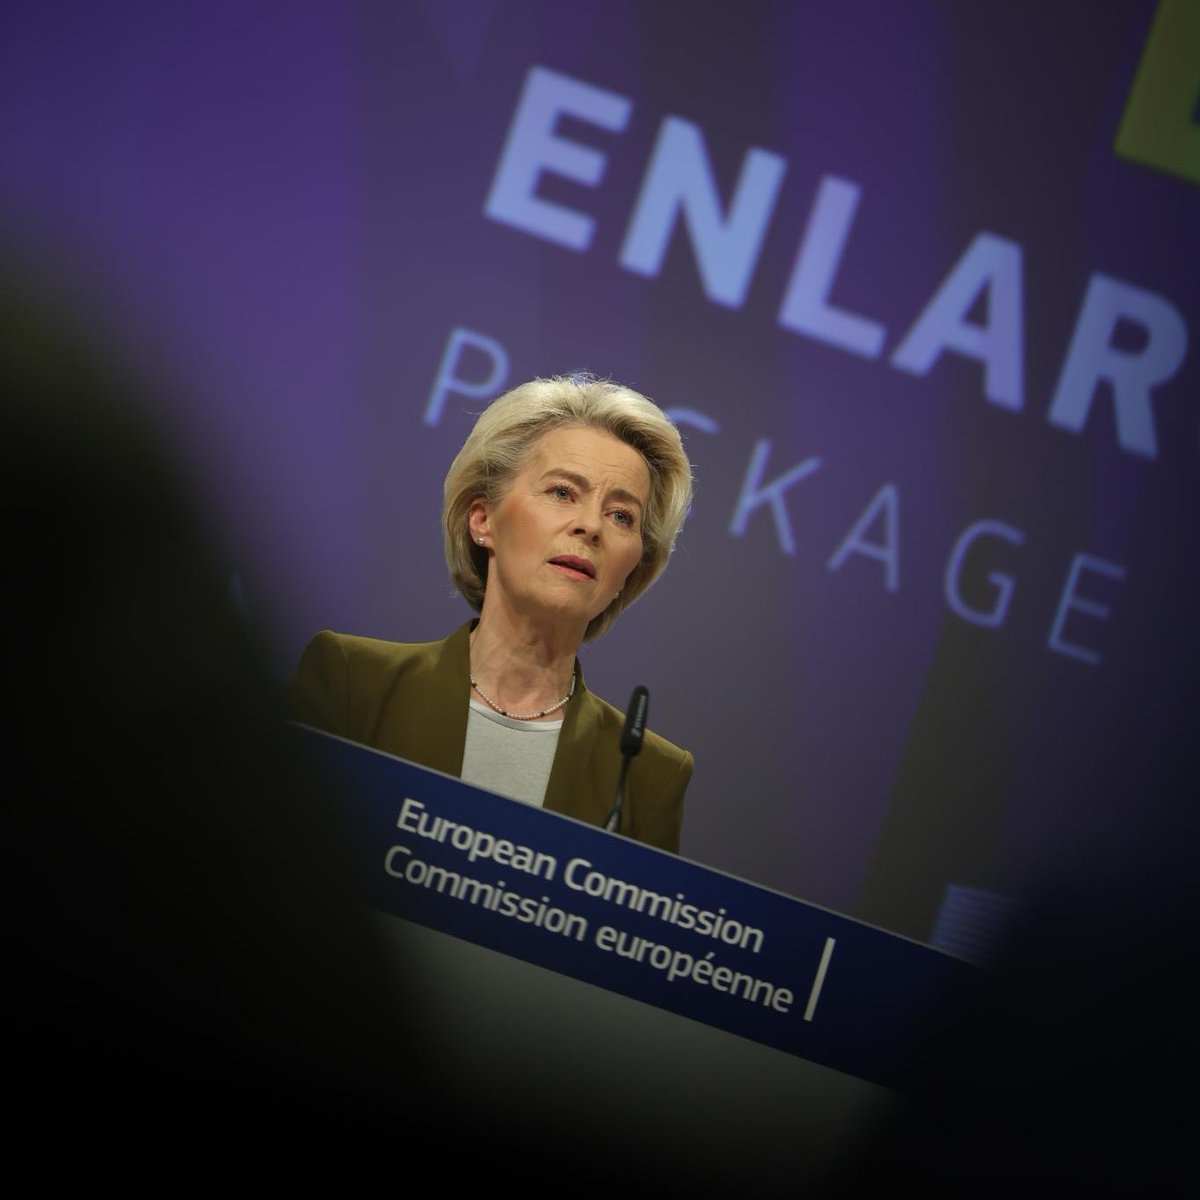 Ursula von der Leyen: Ukrainians are deeply reforming their country and preparing for accession,neven as they are fighting an existential war. Today the Commission recommends that the Council opens accession negotiations with Ukraine